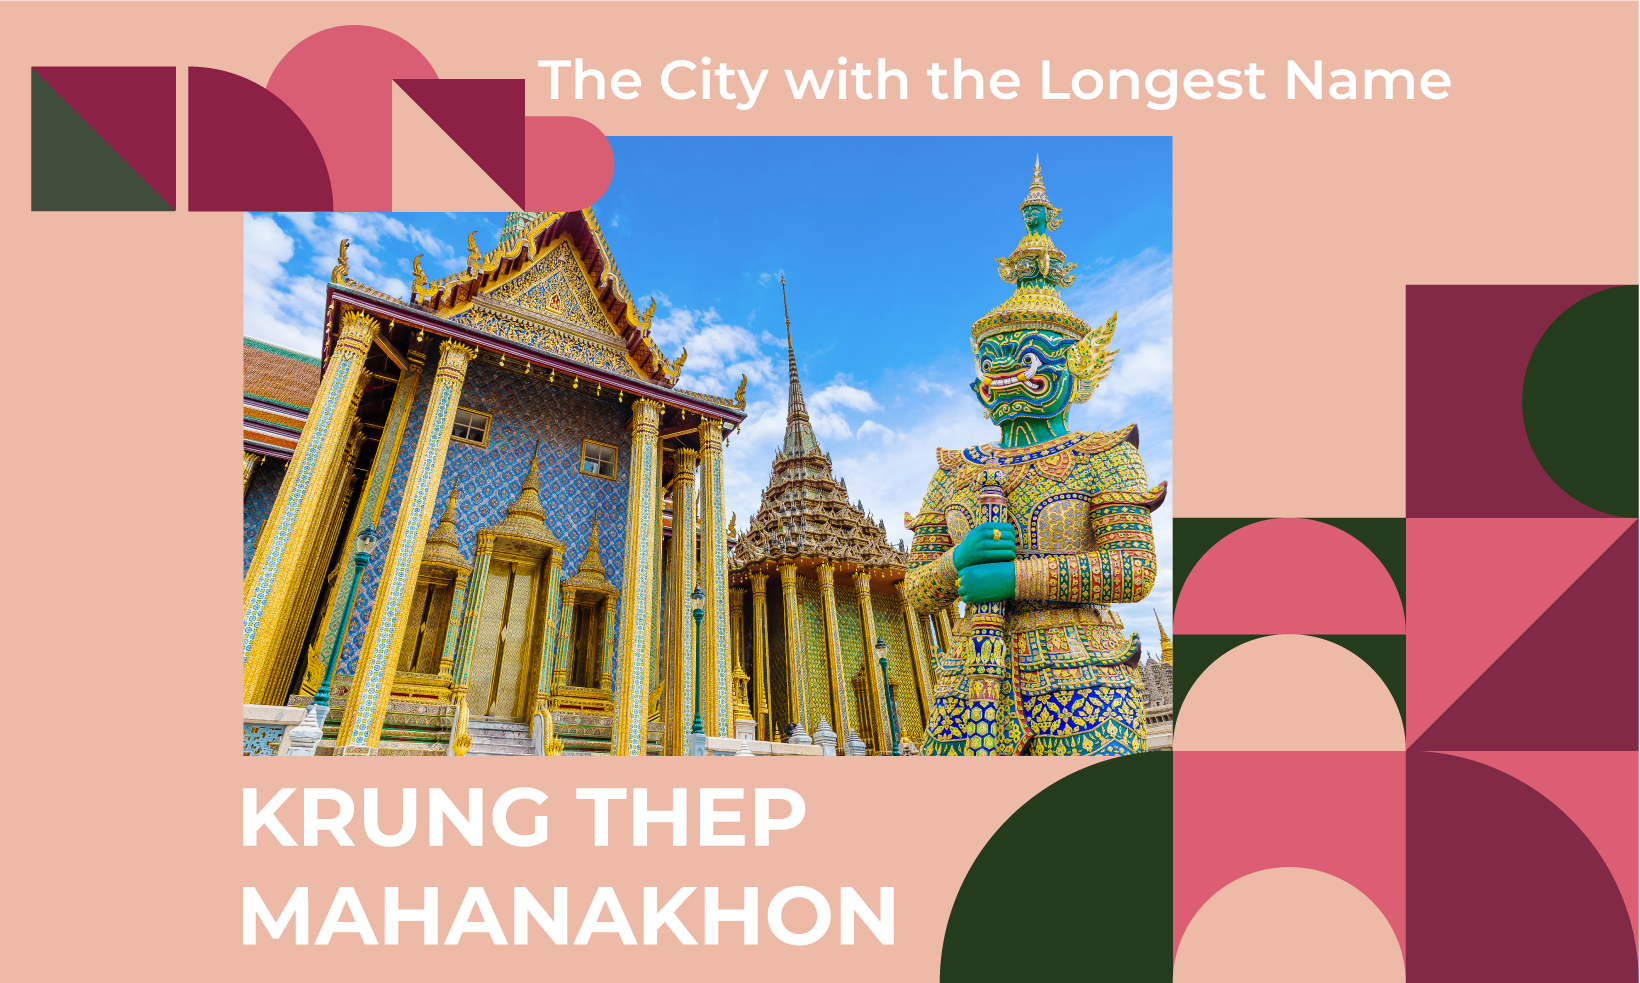 Grand palace is situated in Bangkok which is the city with the longest name